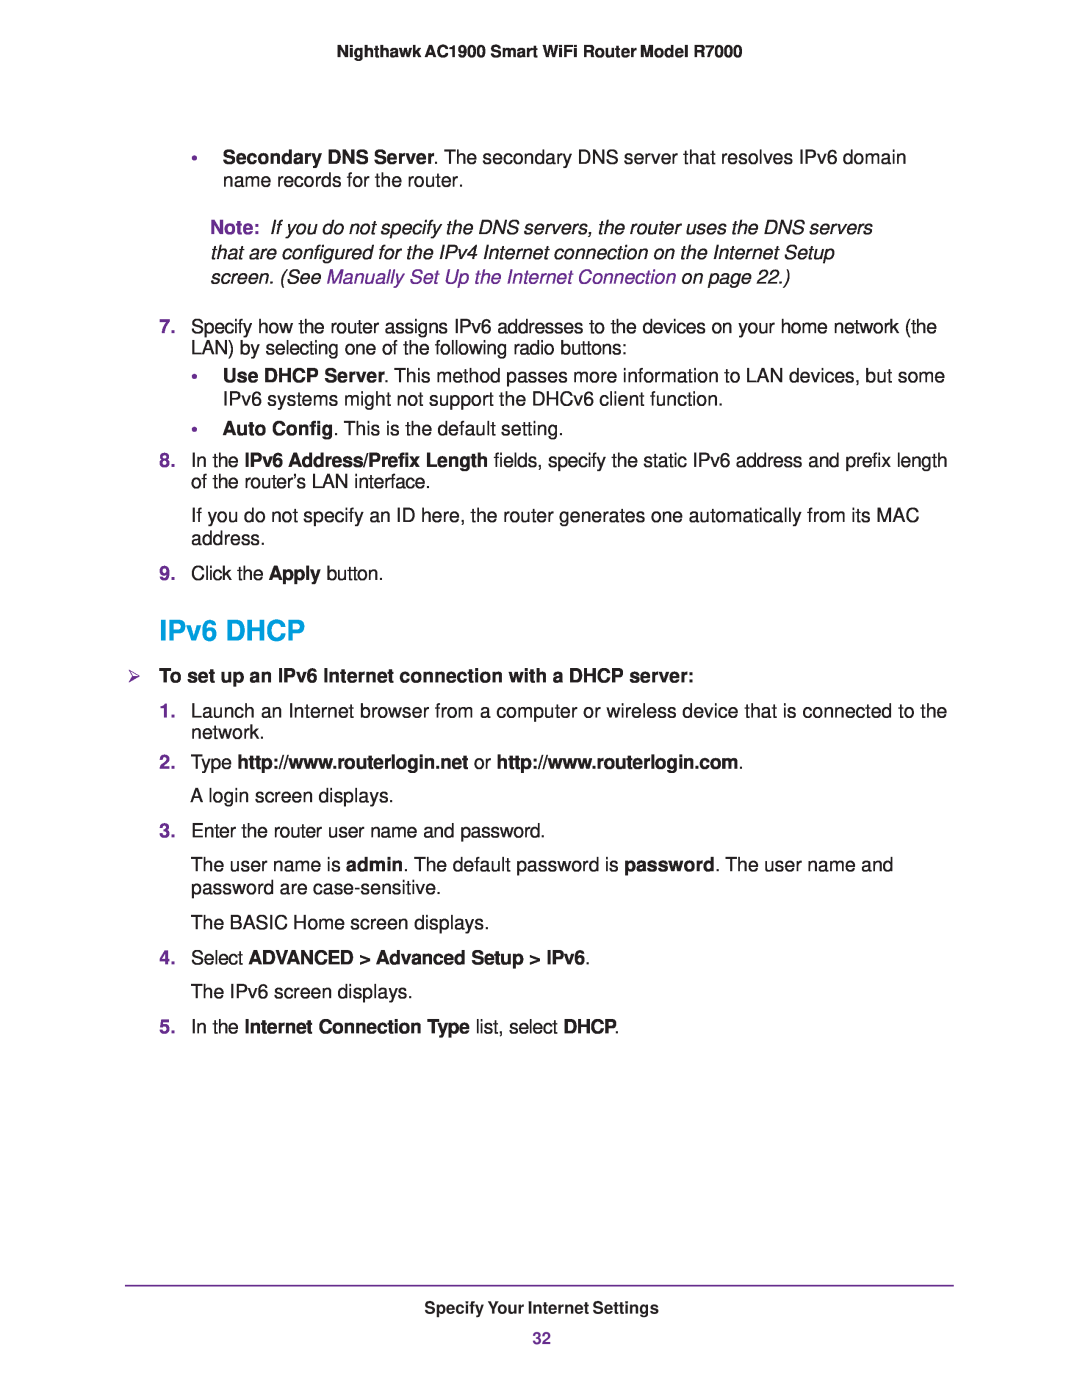 NETGEAR R7000 user manual IPv6 DHCP,  To set up an IPv6 Internet connection with a DHCP server 